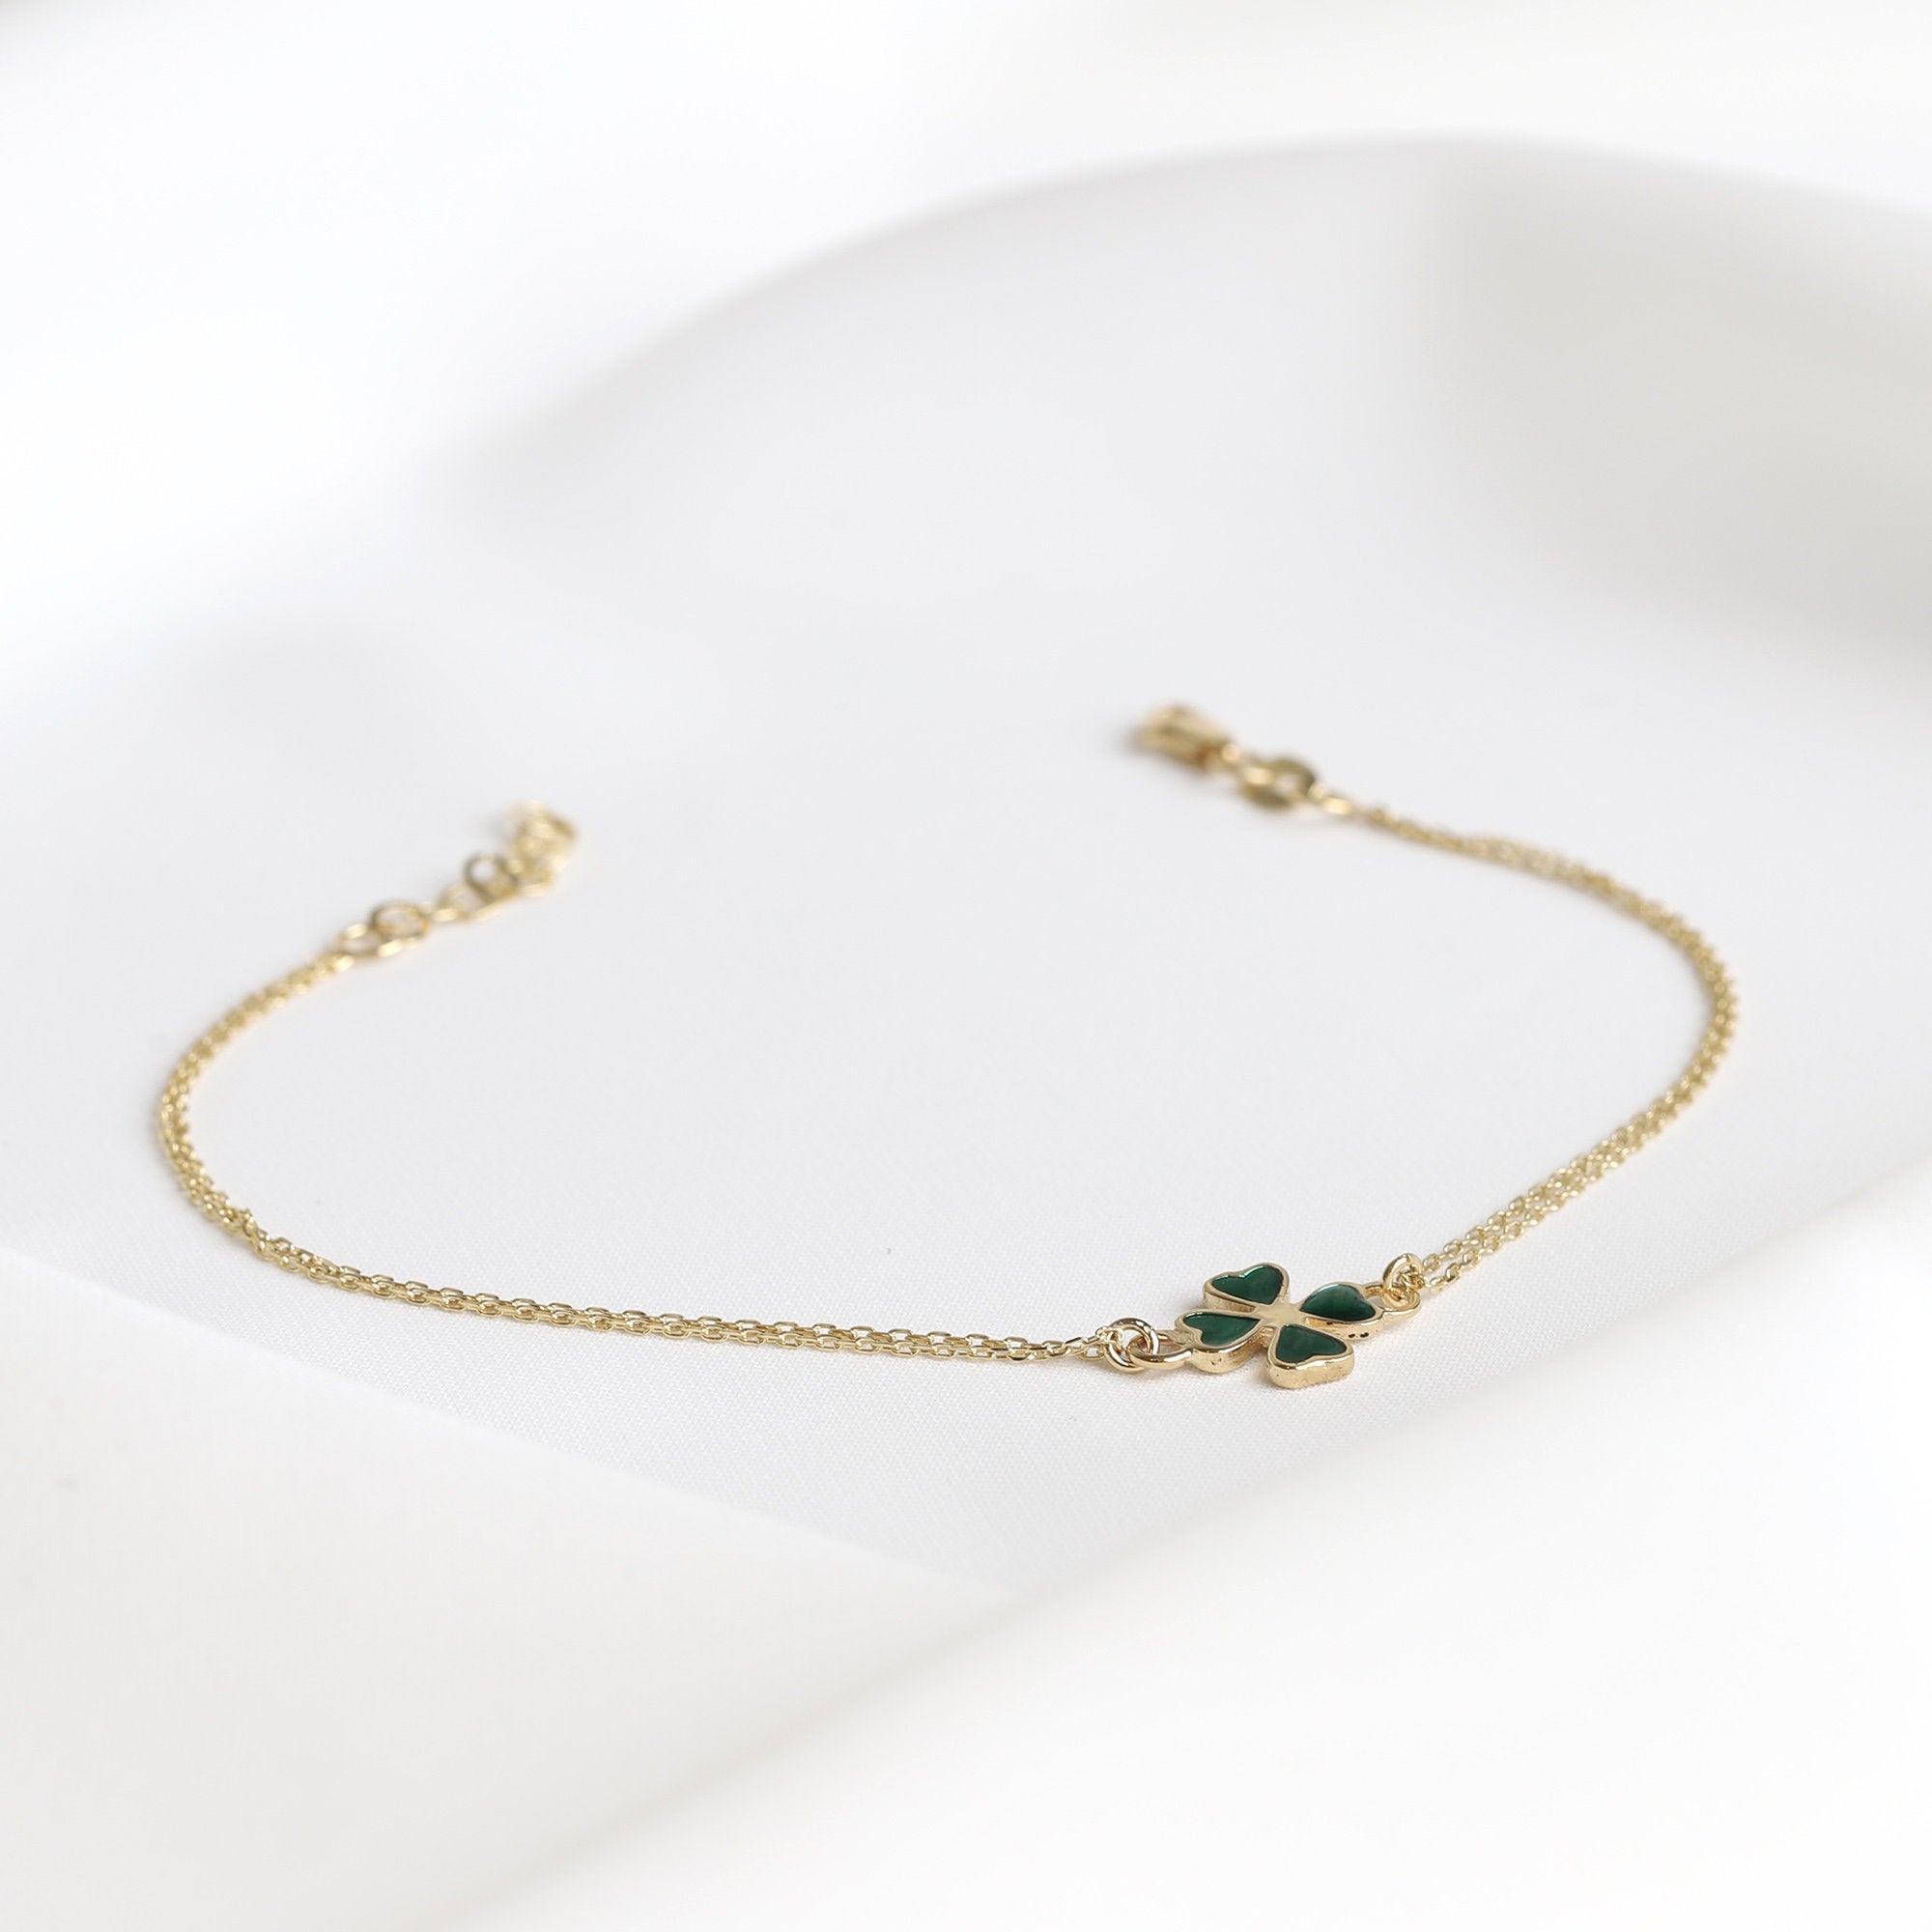 Four Leaf Clover gold plated bracelet with green inlaid